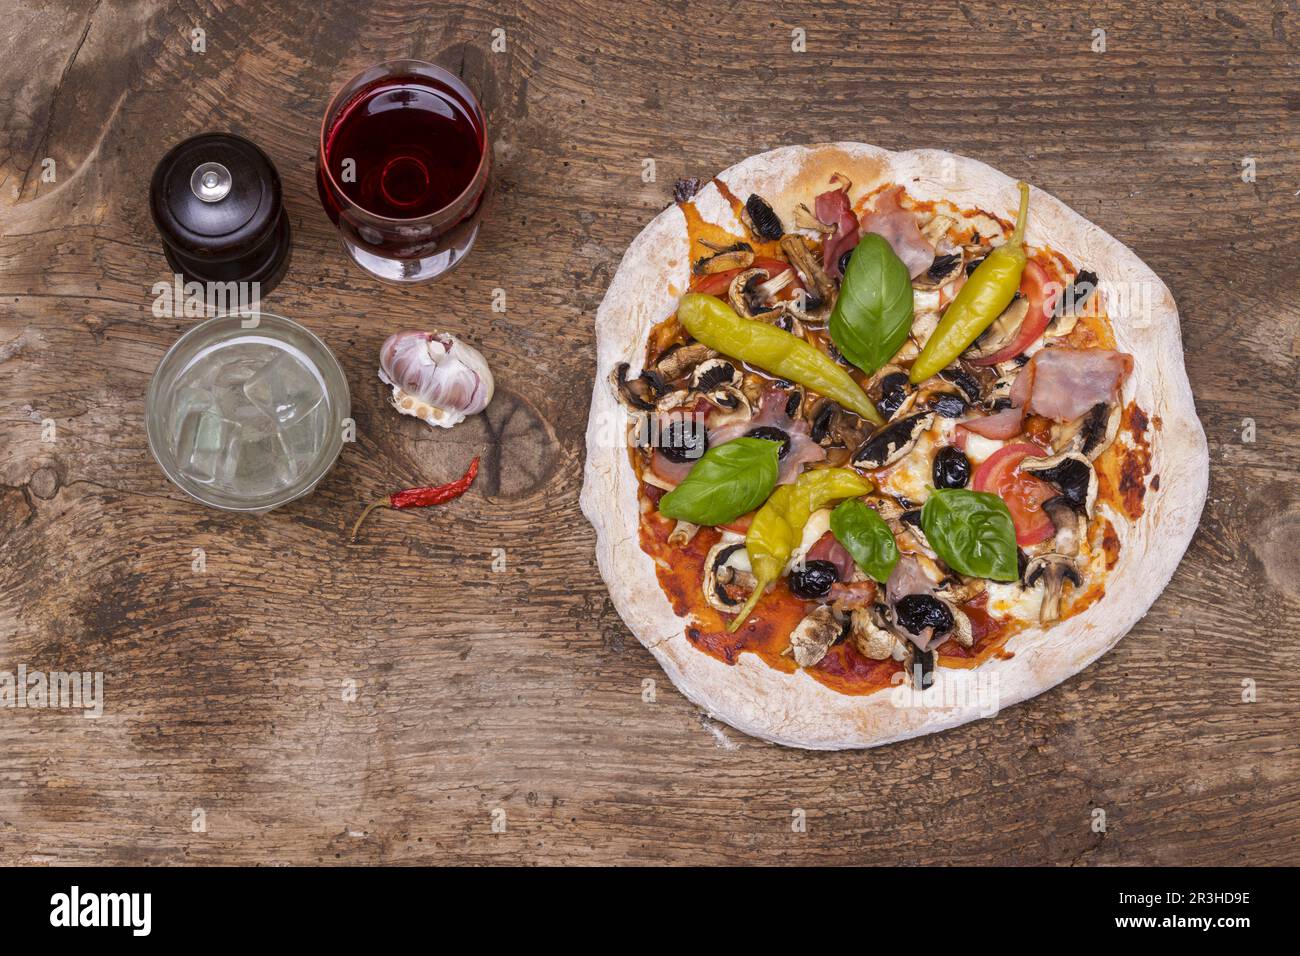 Supervision of a pizza on wood Stock Photo